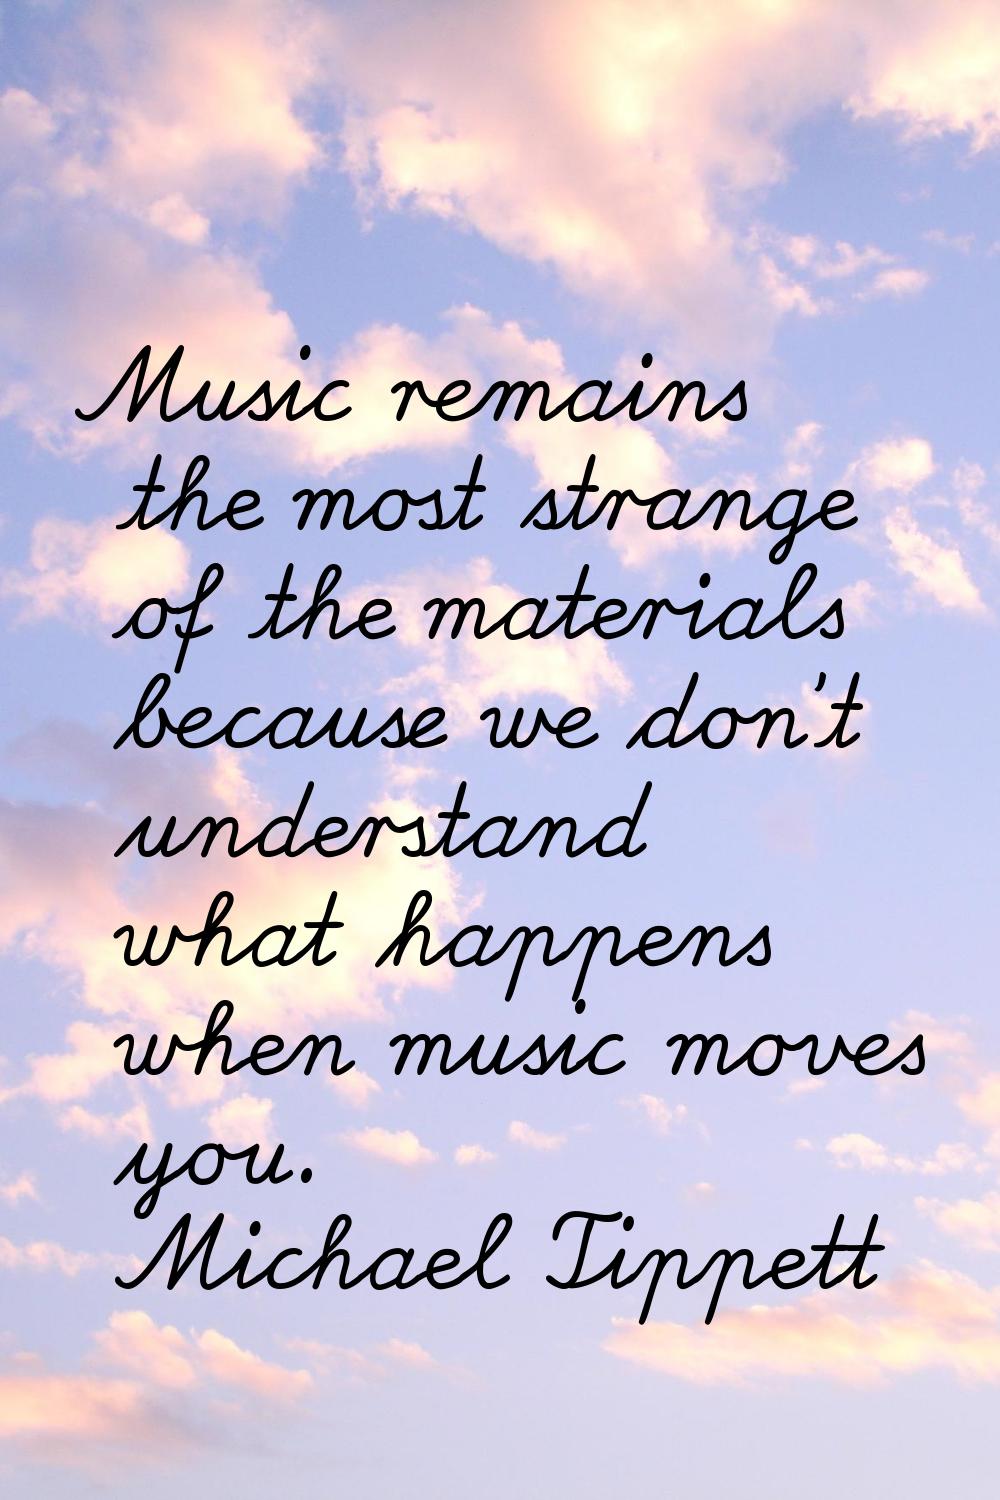 Music remains the most strange of the materials because we don't understand what happens when music